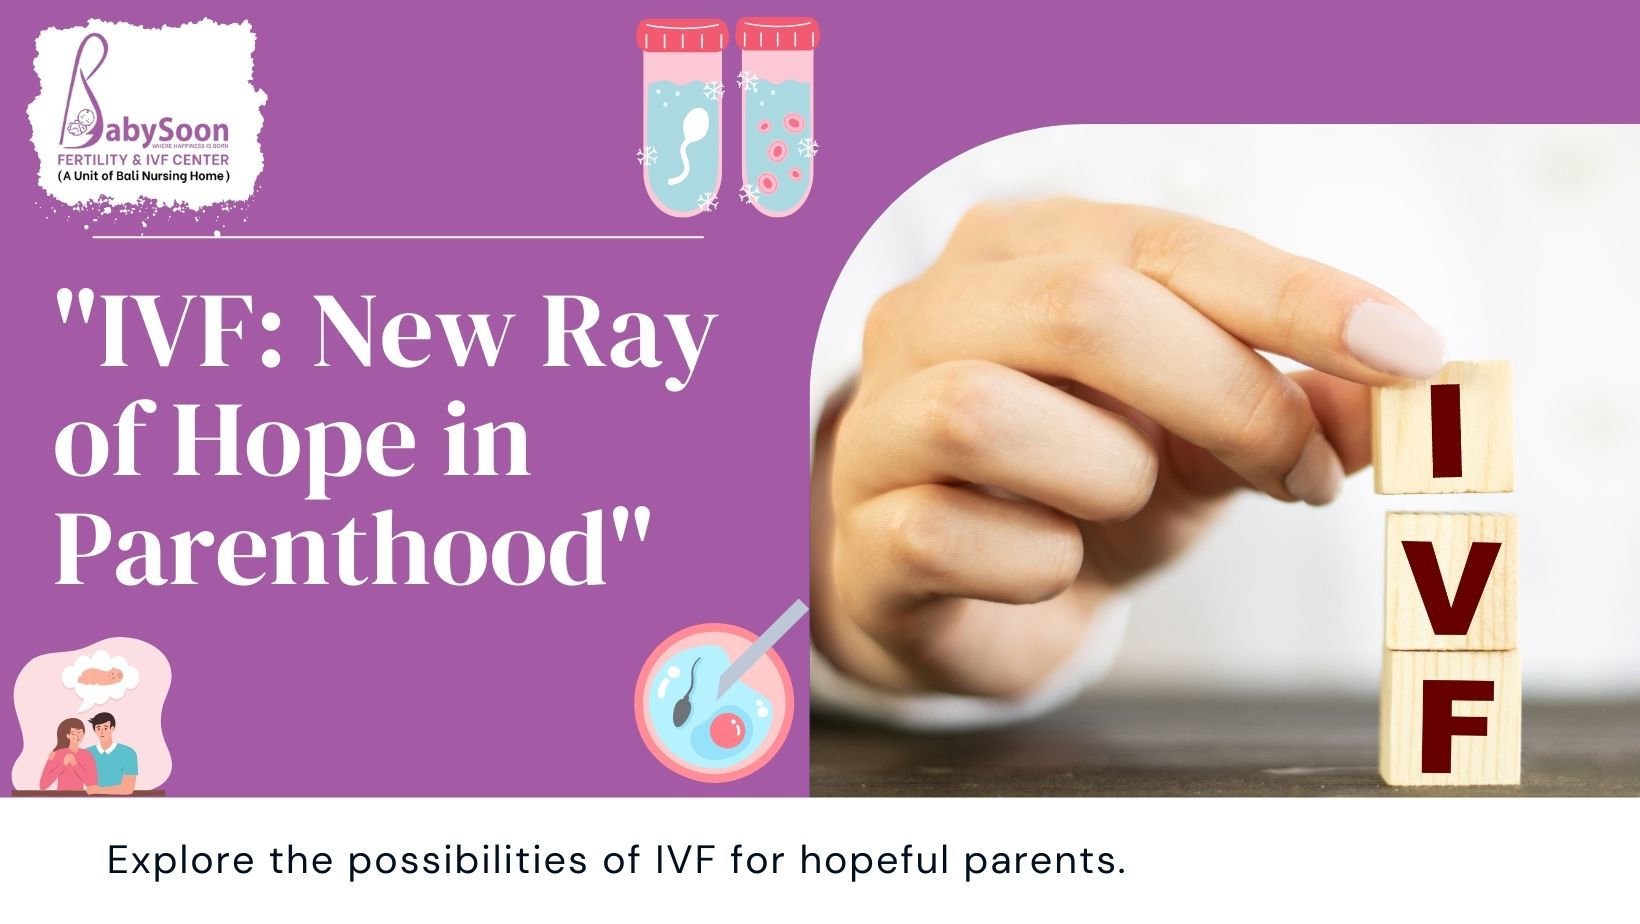 IVF New Ray of Hope in Parenthood